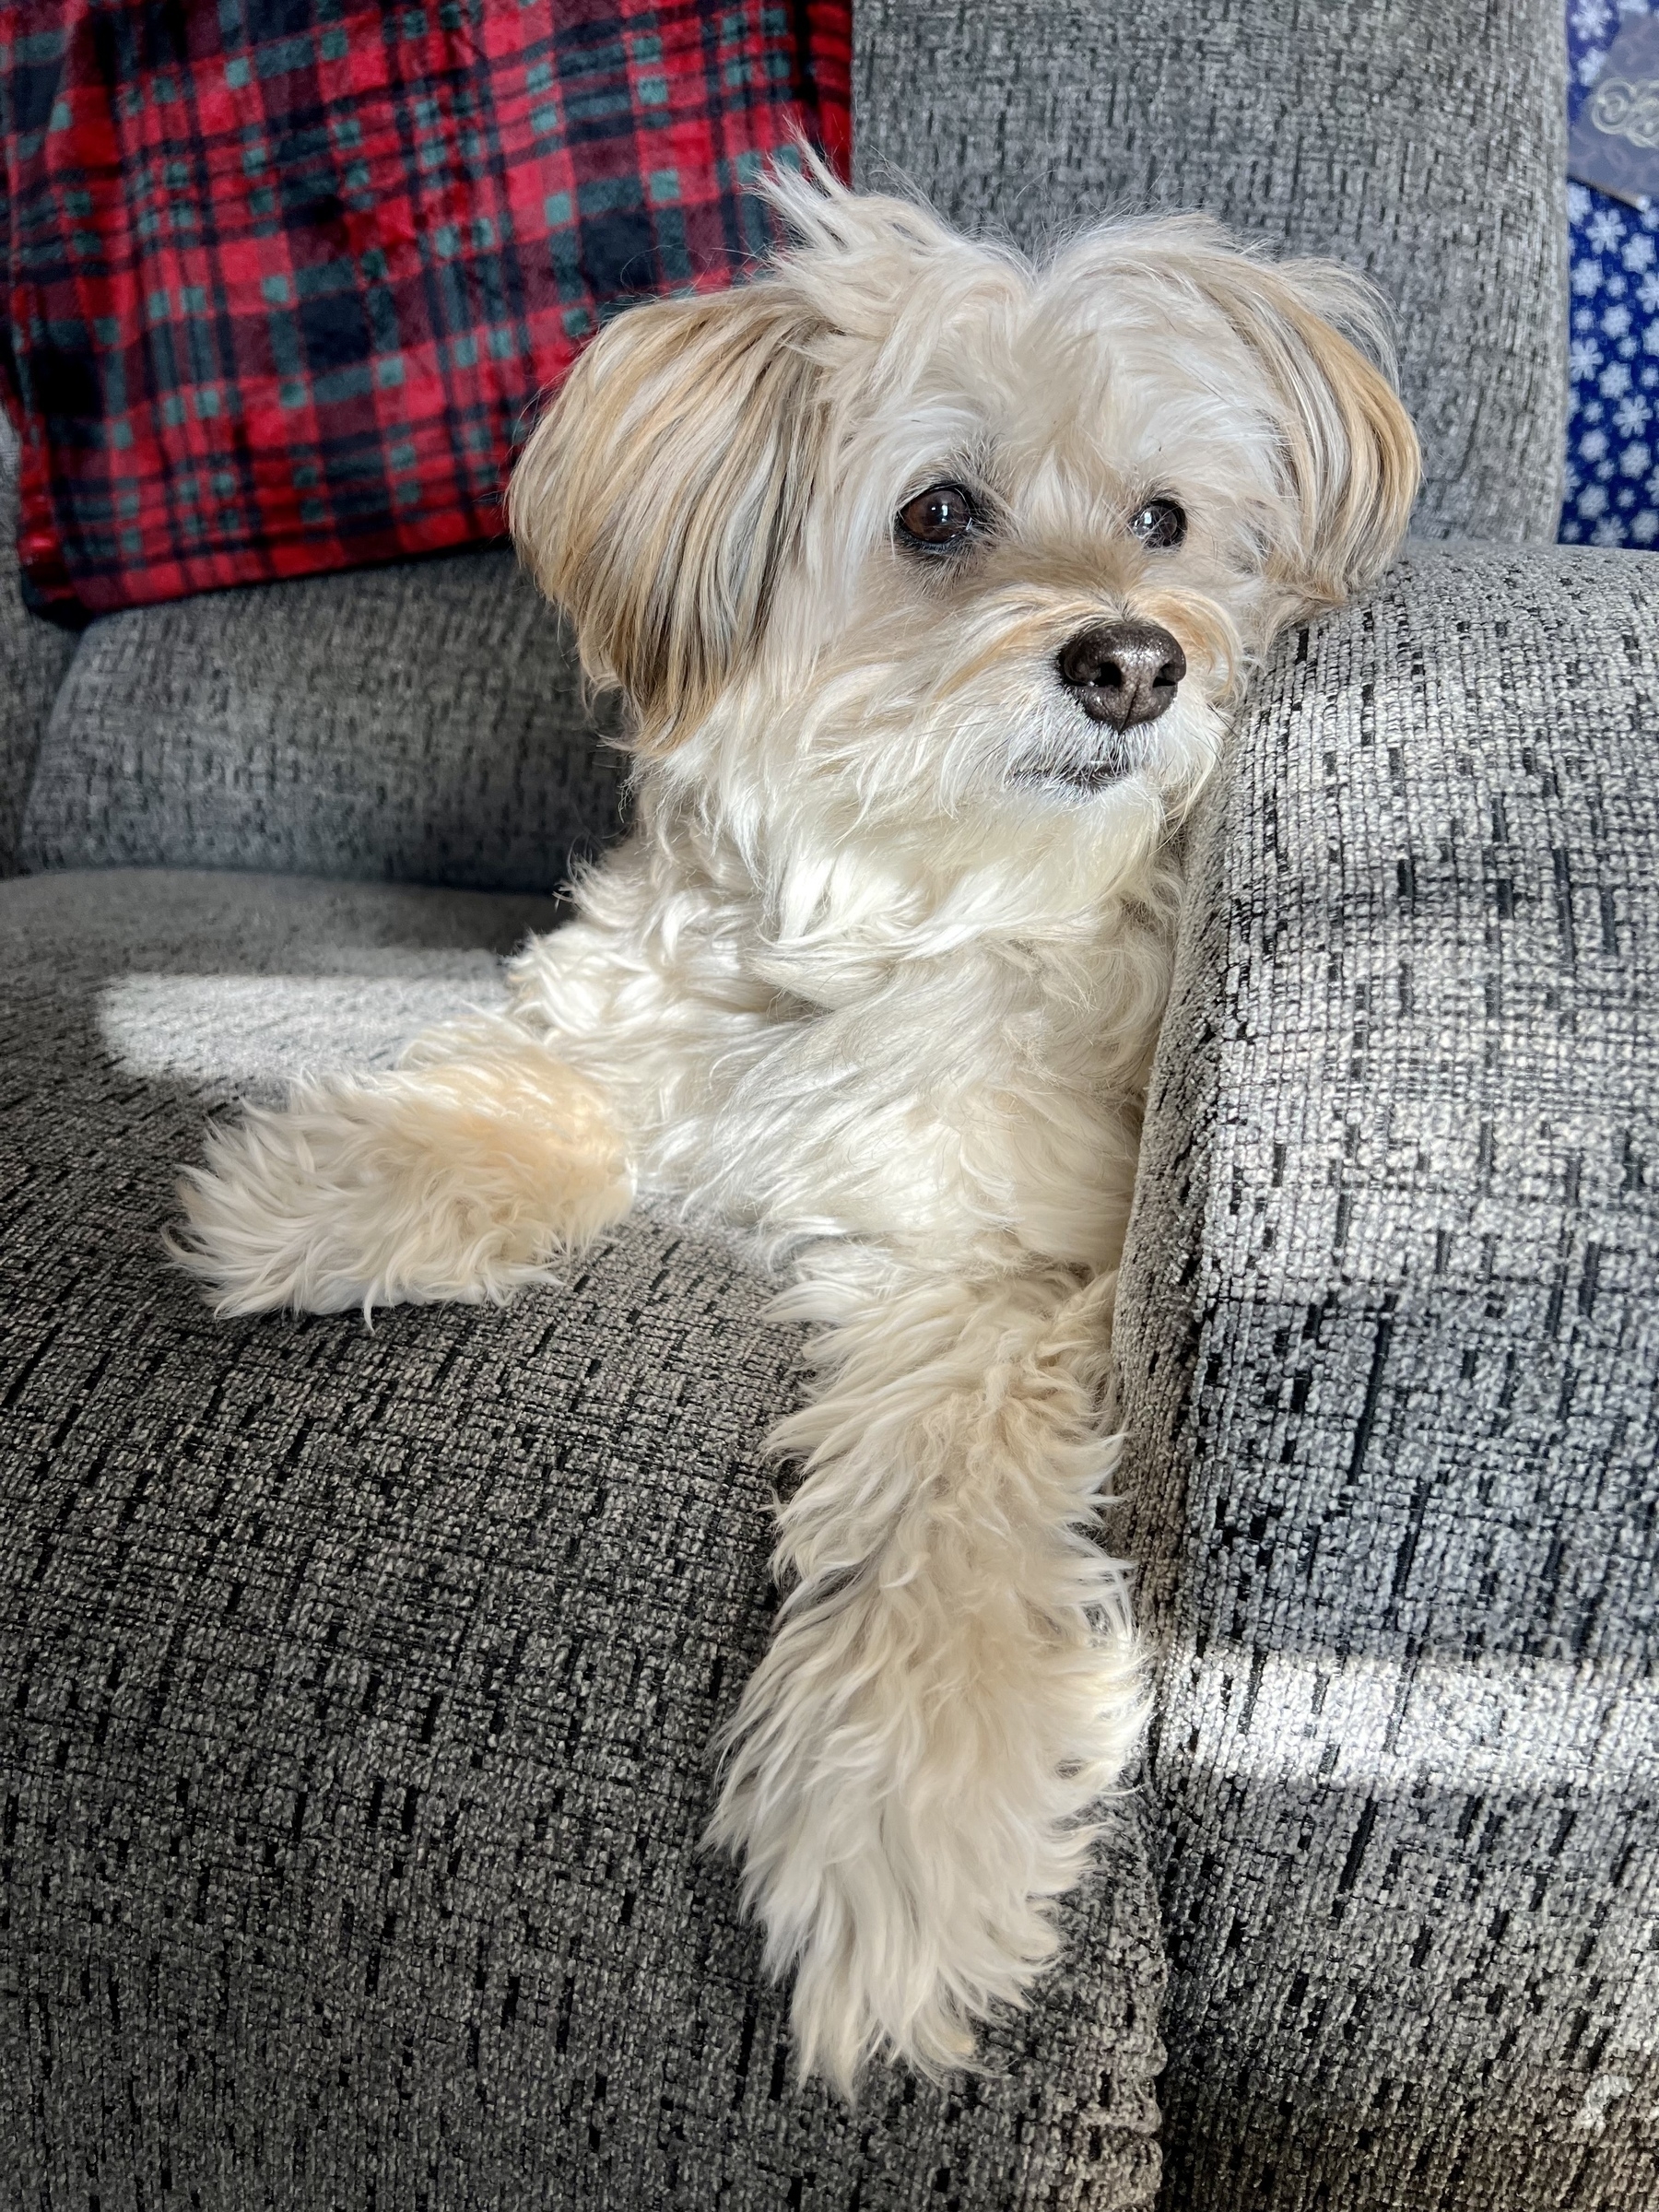 White dog with floppy ears, black eyes, and an adorable black / shinny nose, on a grey/green recliner with a red plaid blanket in the background, looking off into the distance.